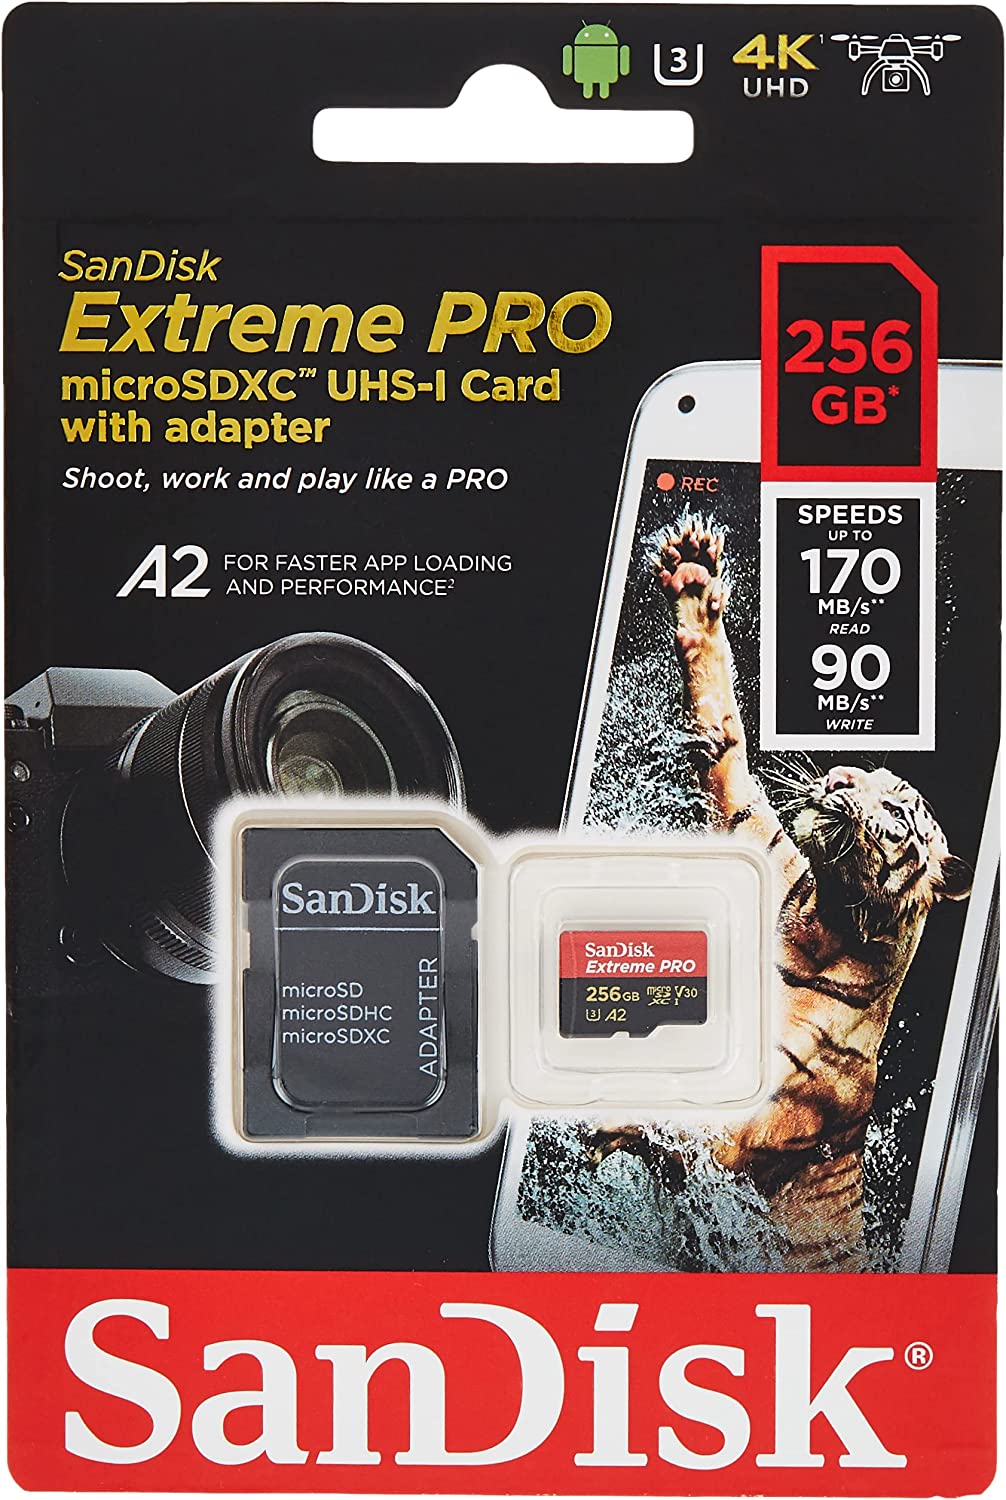 SanDisk Extreme Pro microSD UHS I Card 256GB, 200MB/s Read, 140MB/s Write